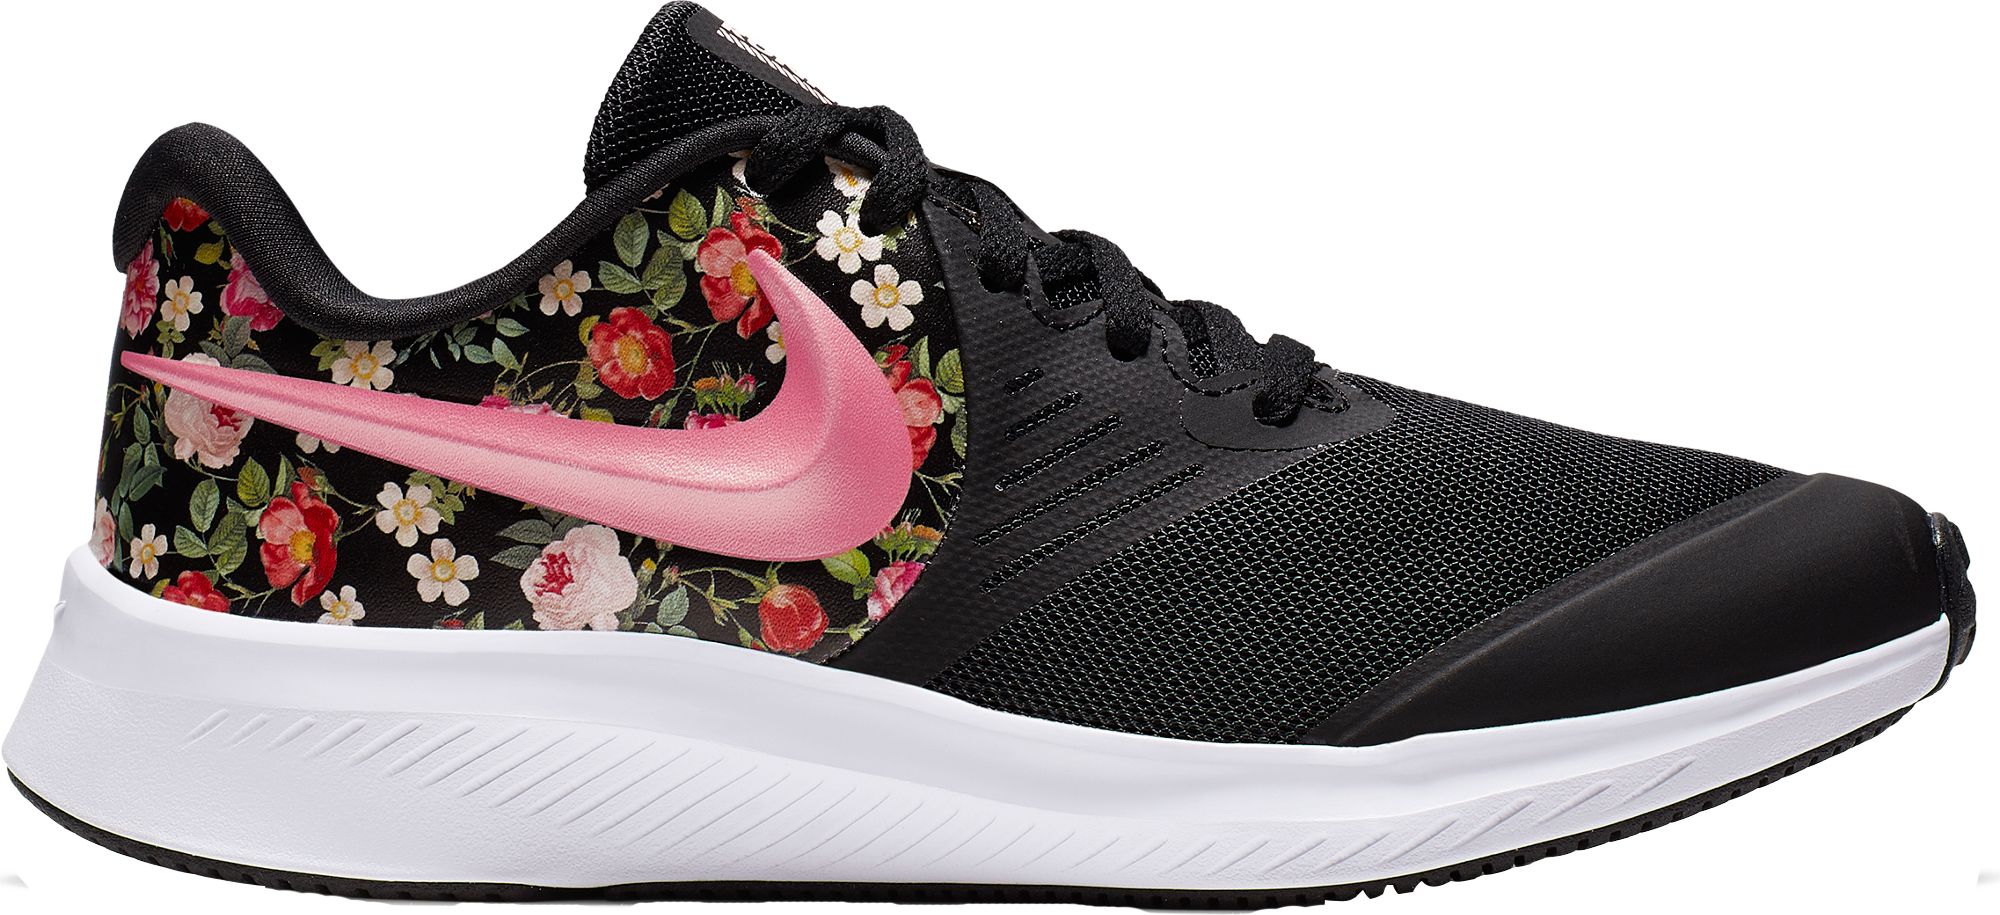 nike running shoes flowers